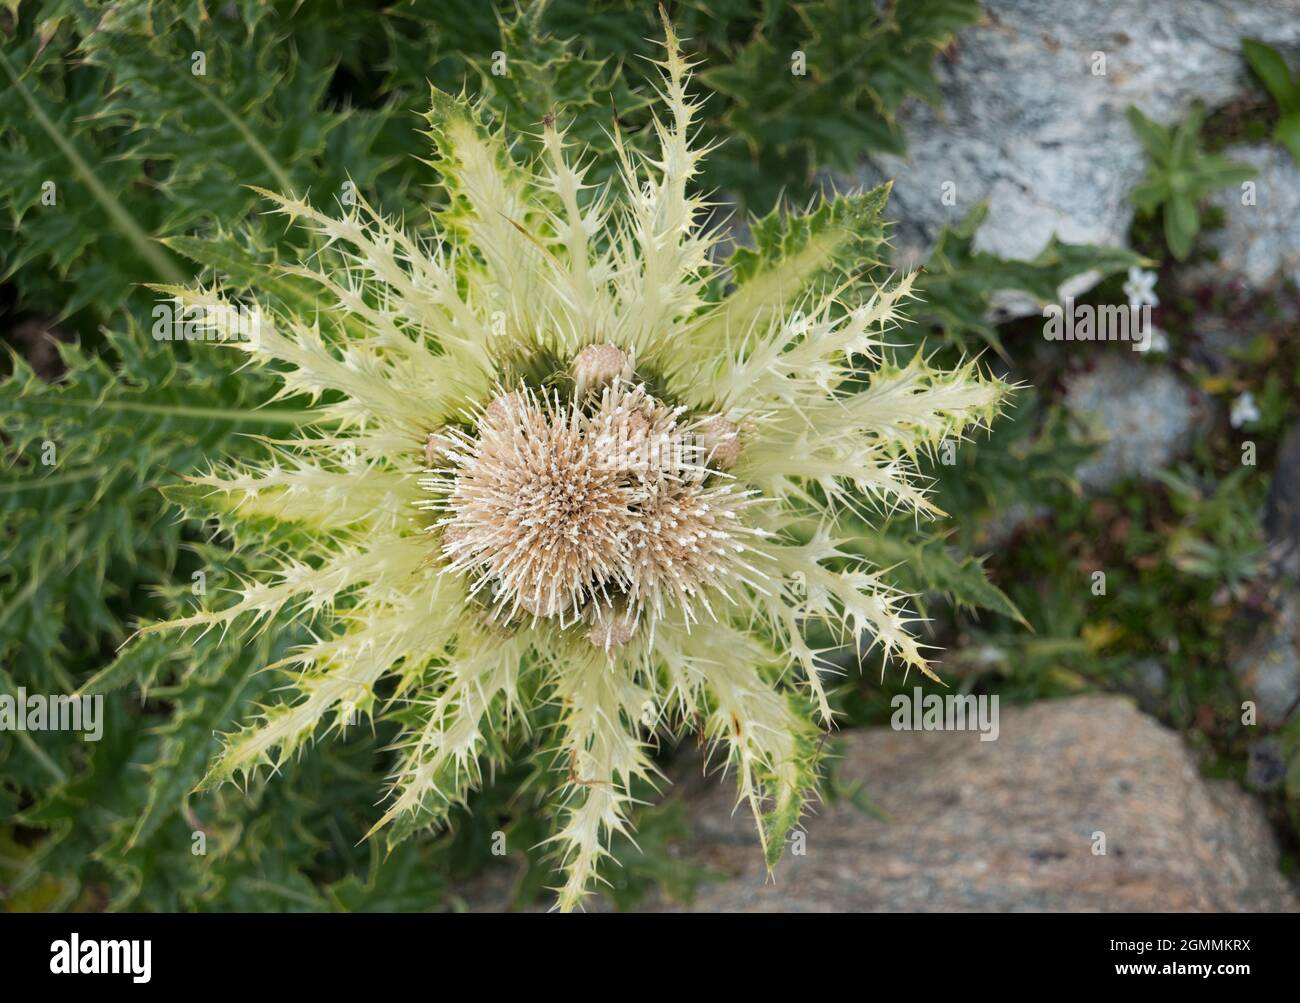 Top view of the flower head of Spiniest thistle Stock Photo